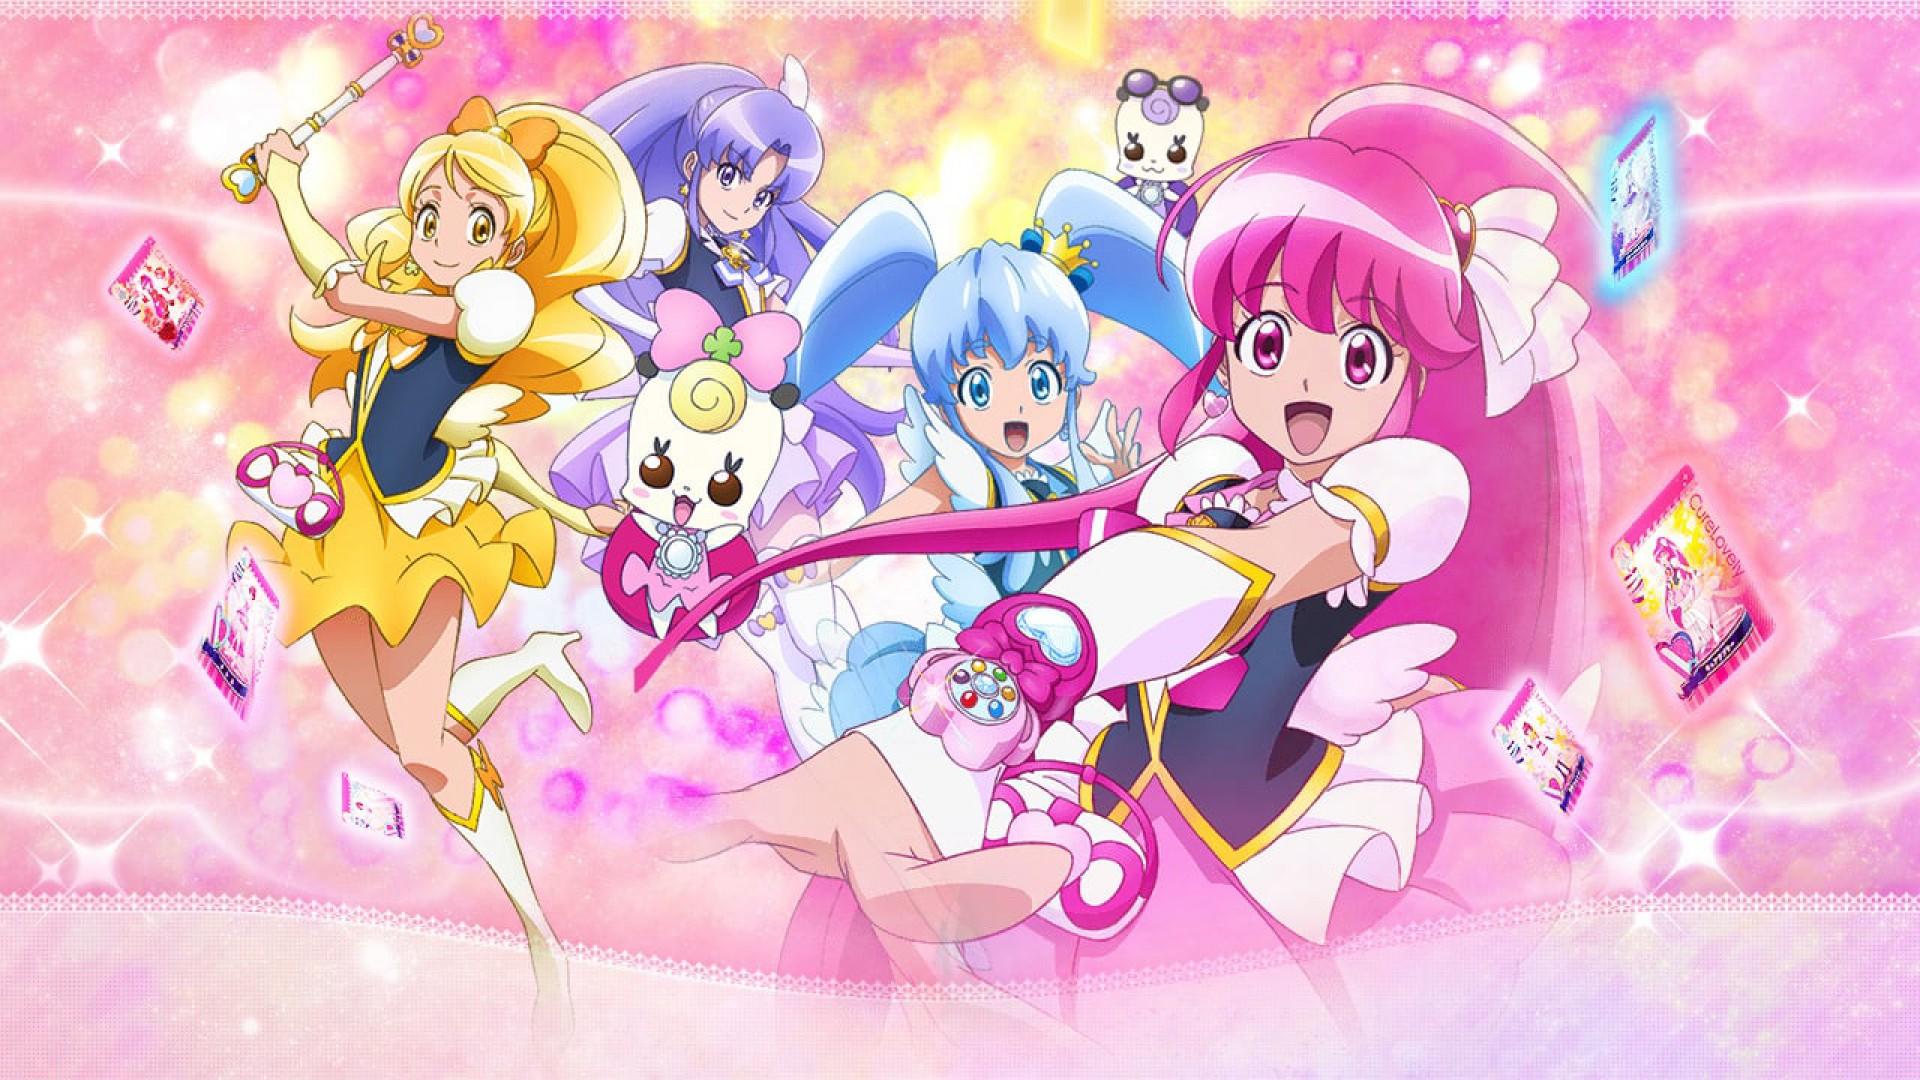 Happiness Charge Precure!: Ballerina of the Doll Kingdom